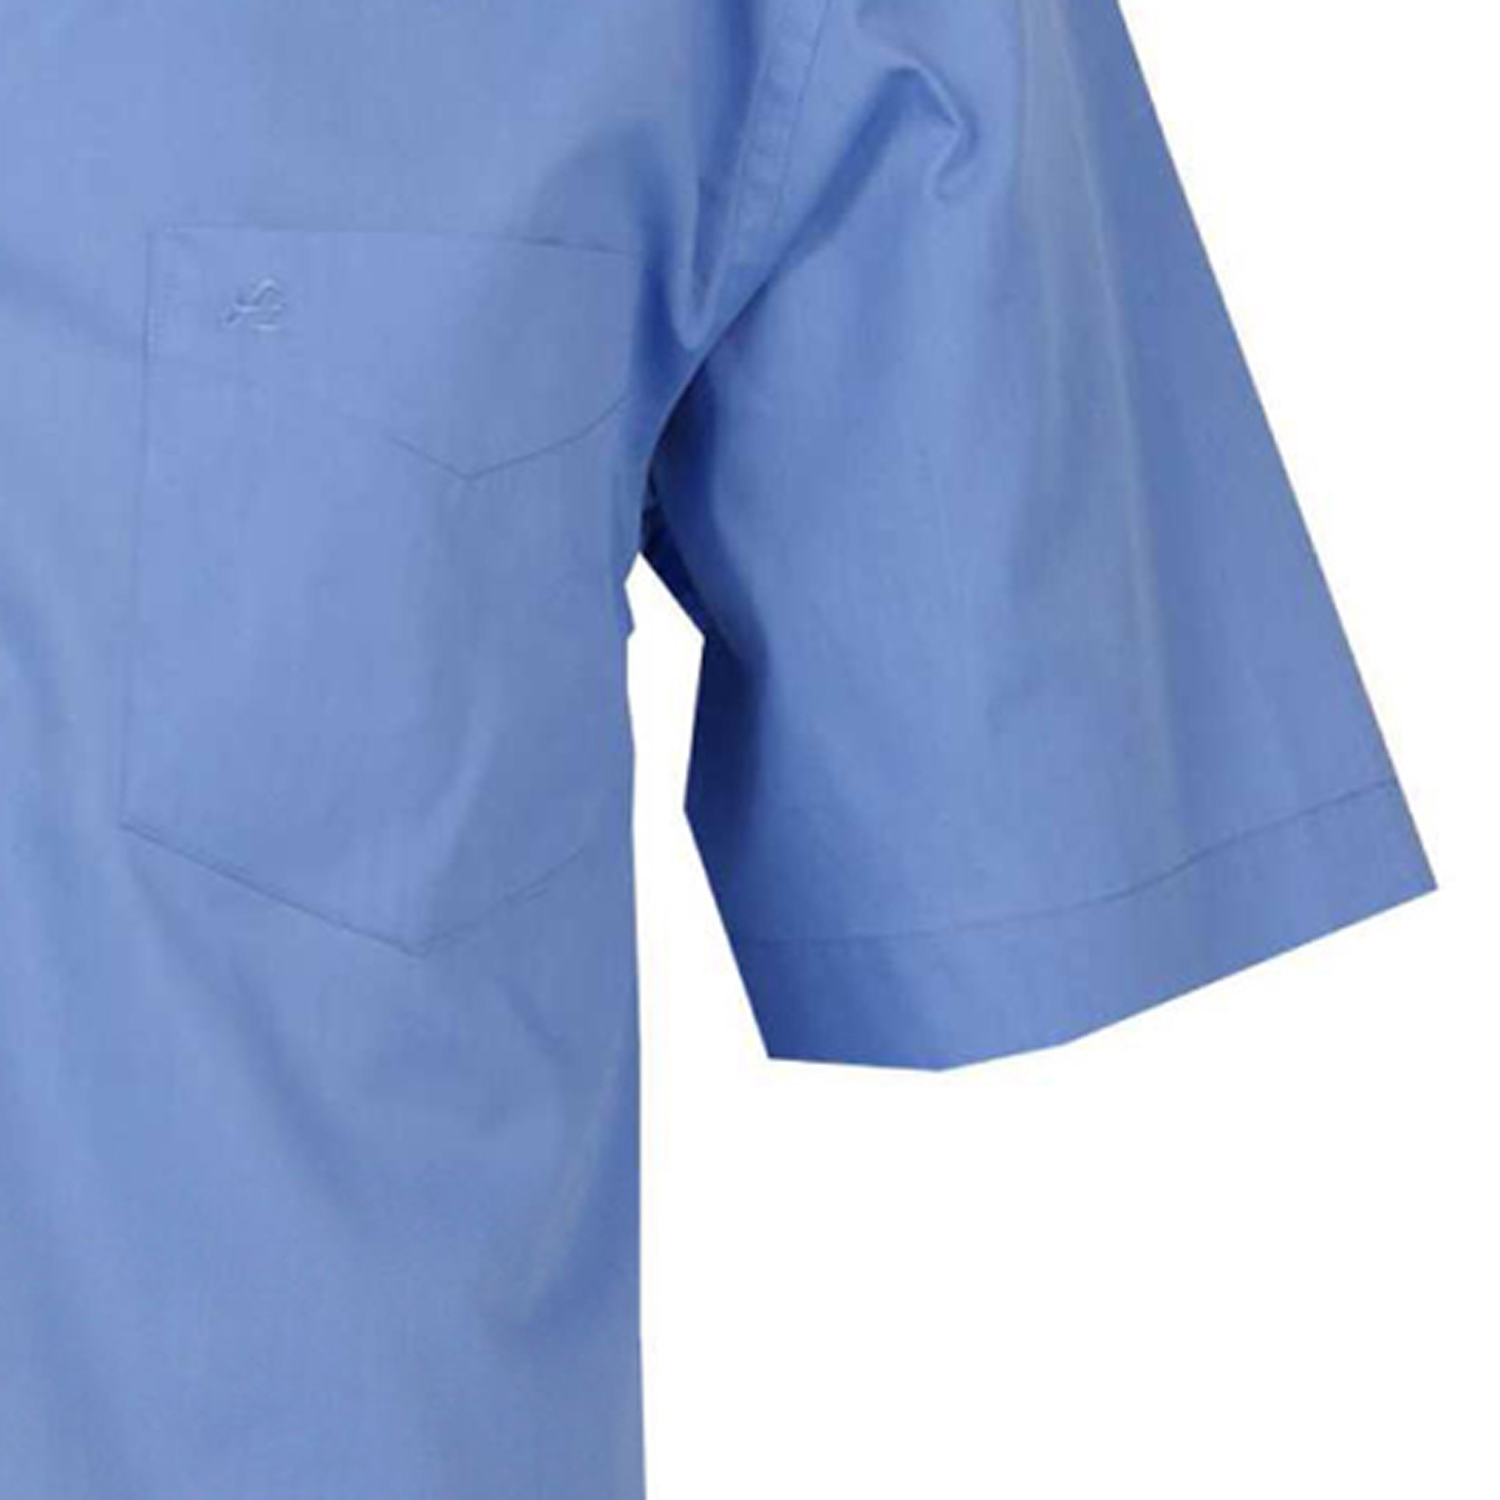 Blue shirt by ARRIVEE in oversizes up to 8XL